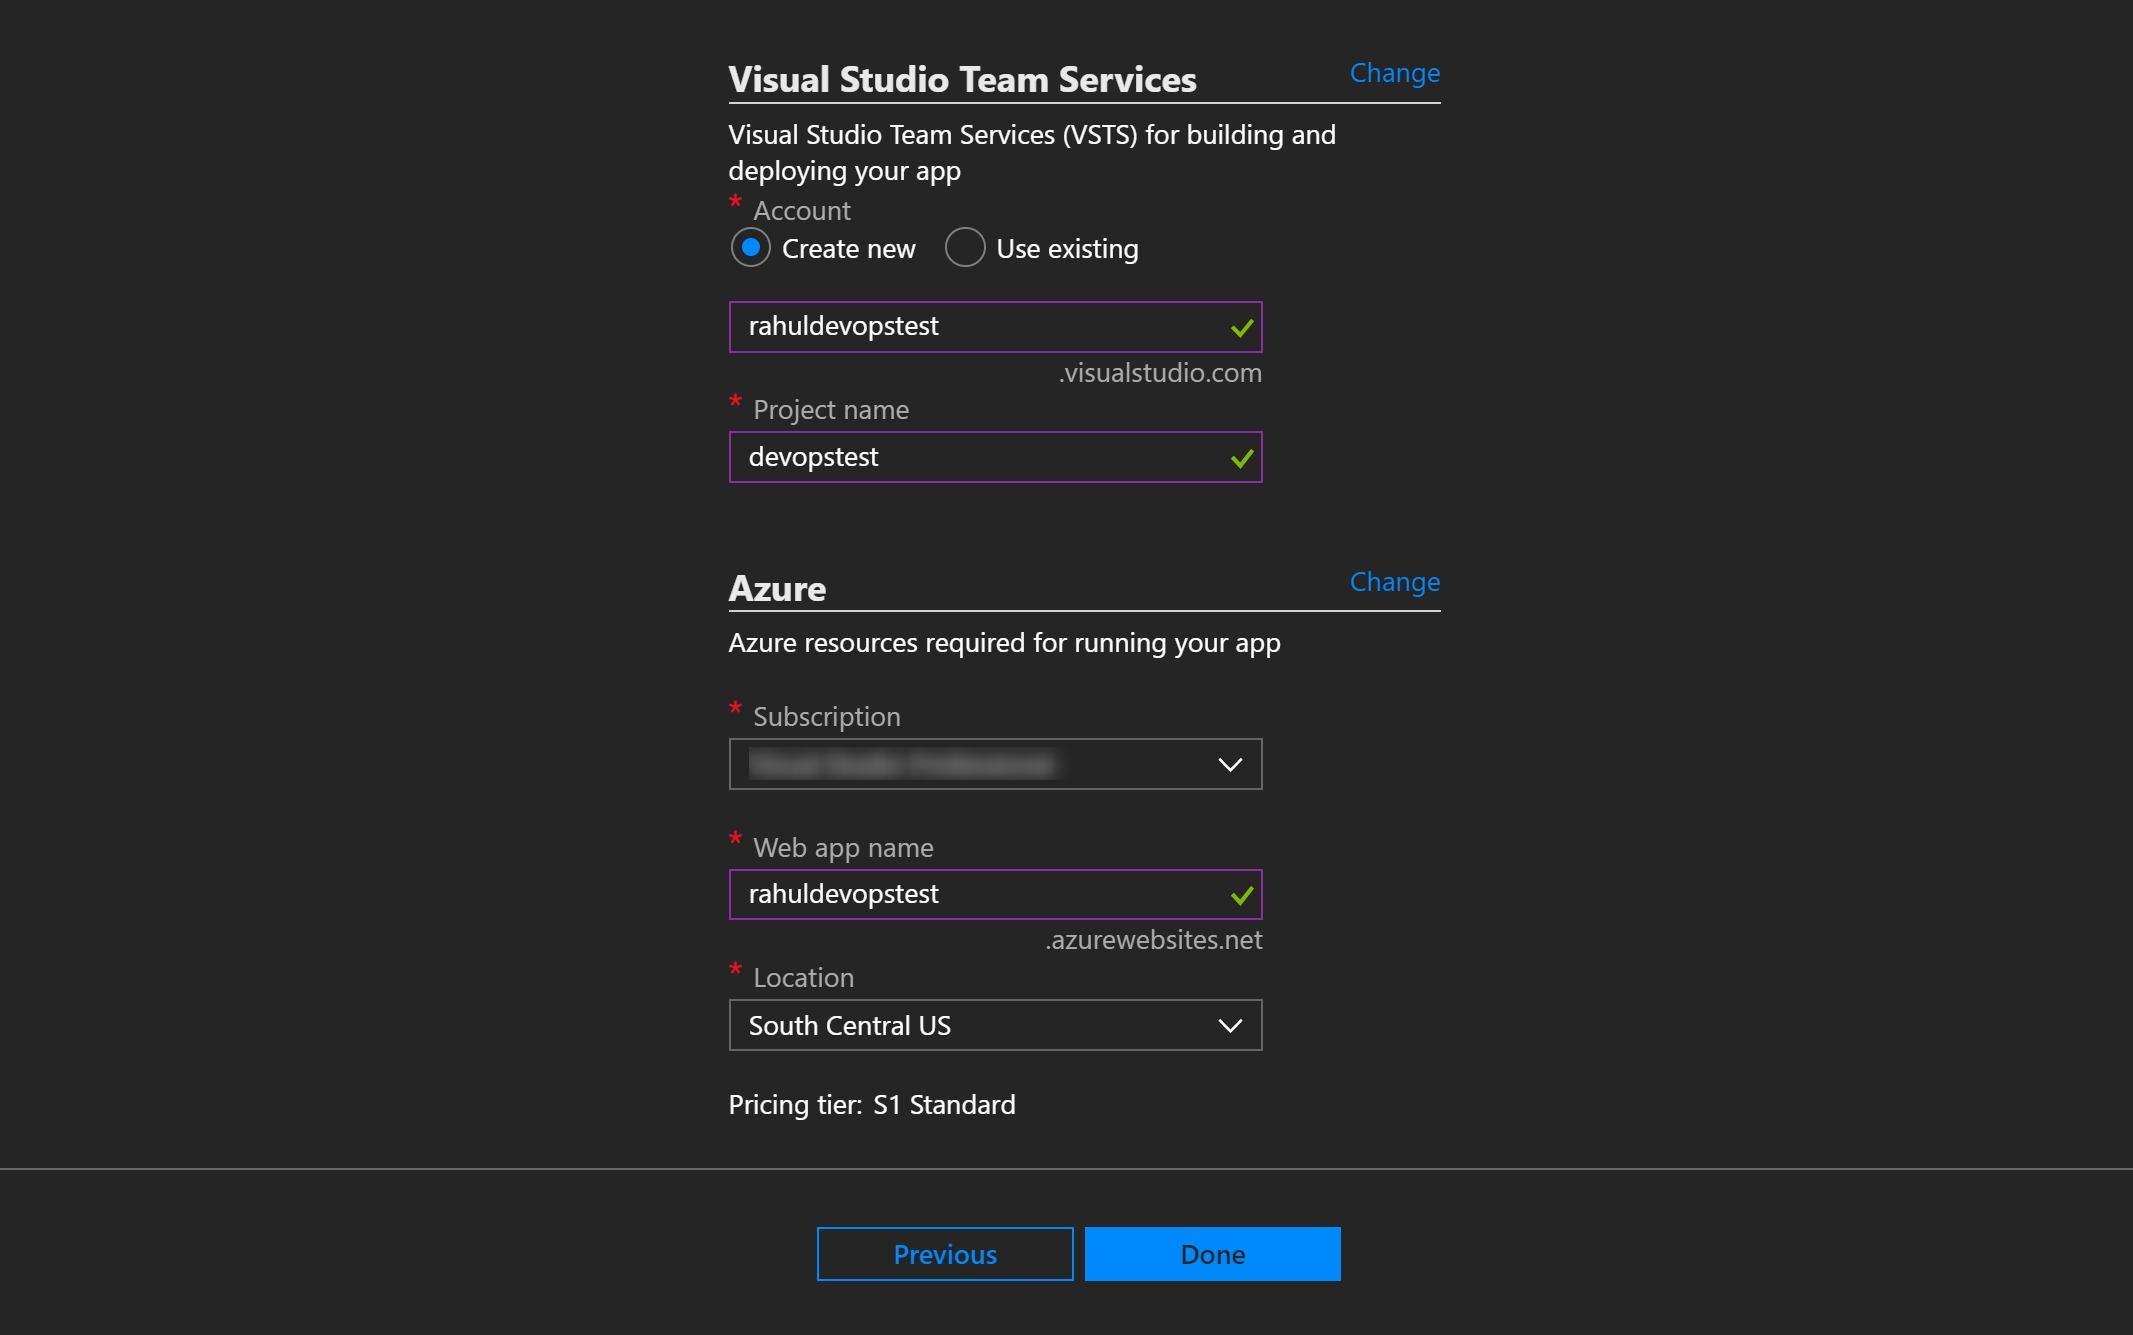 Set VSTS Account and Azure Resources